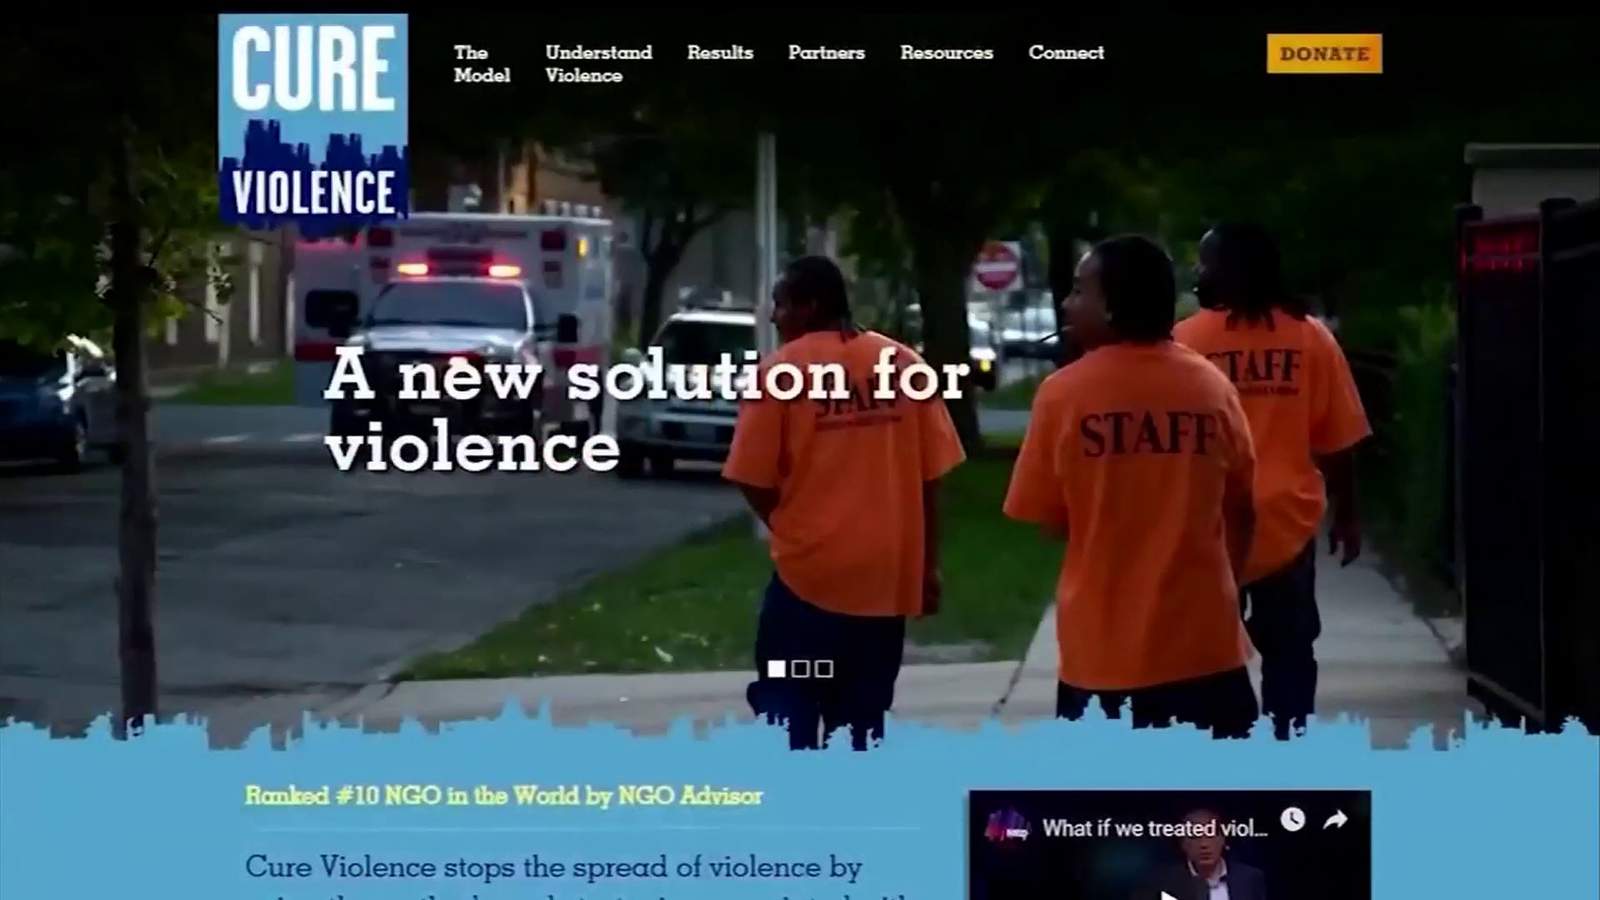 COVID-19 forces Cure Violence group to make changes while working to reduce violence